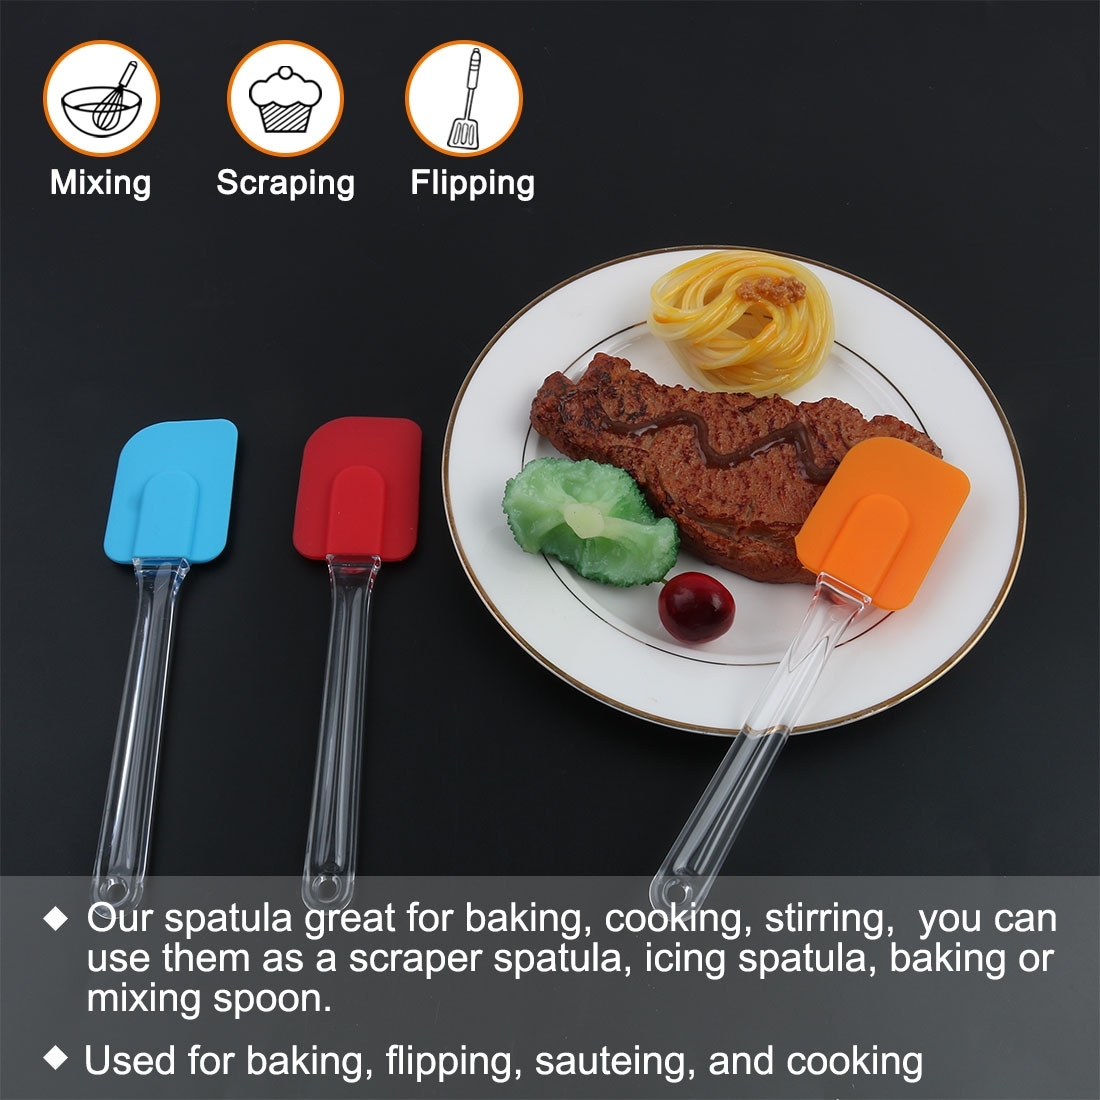 https://ak1.ostkcdn.com/images/products/is/images/direct/c5dccb6cb7ece643f822f4627bdd4ccd29b94436/Flexible-Silicone-Spatula-Set-Heat-Resistant-Non-Stick.jpg